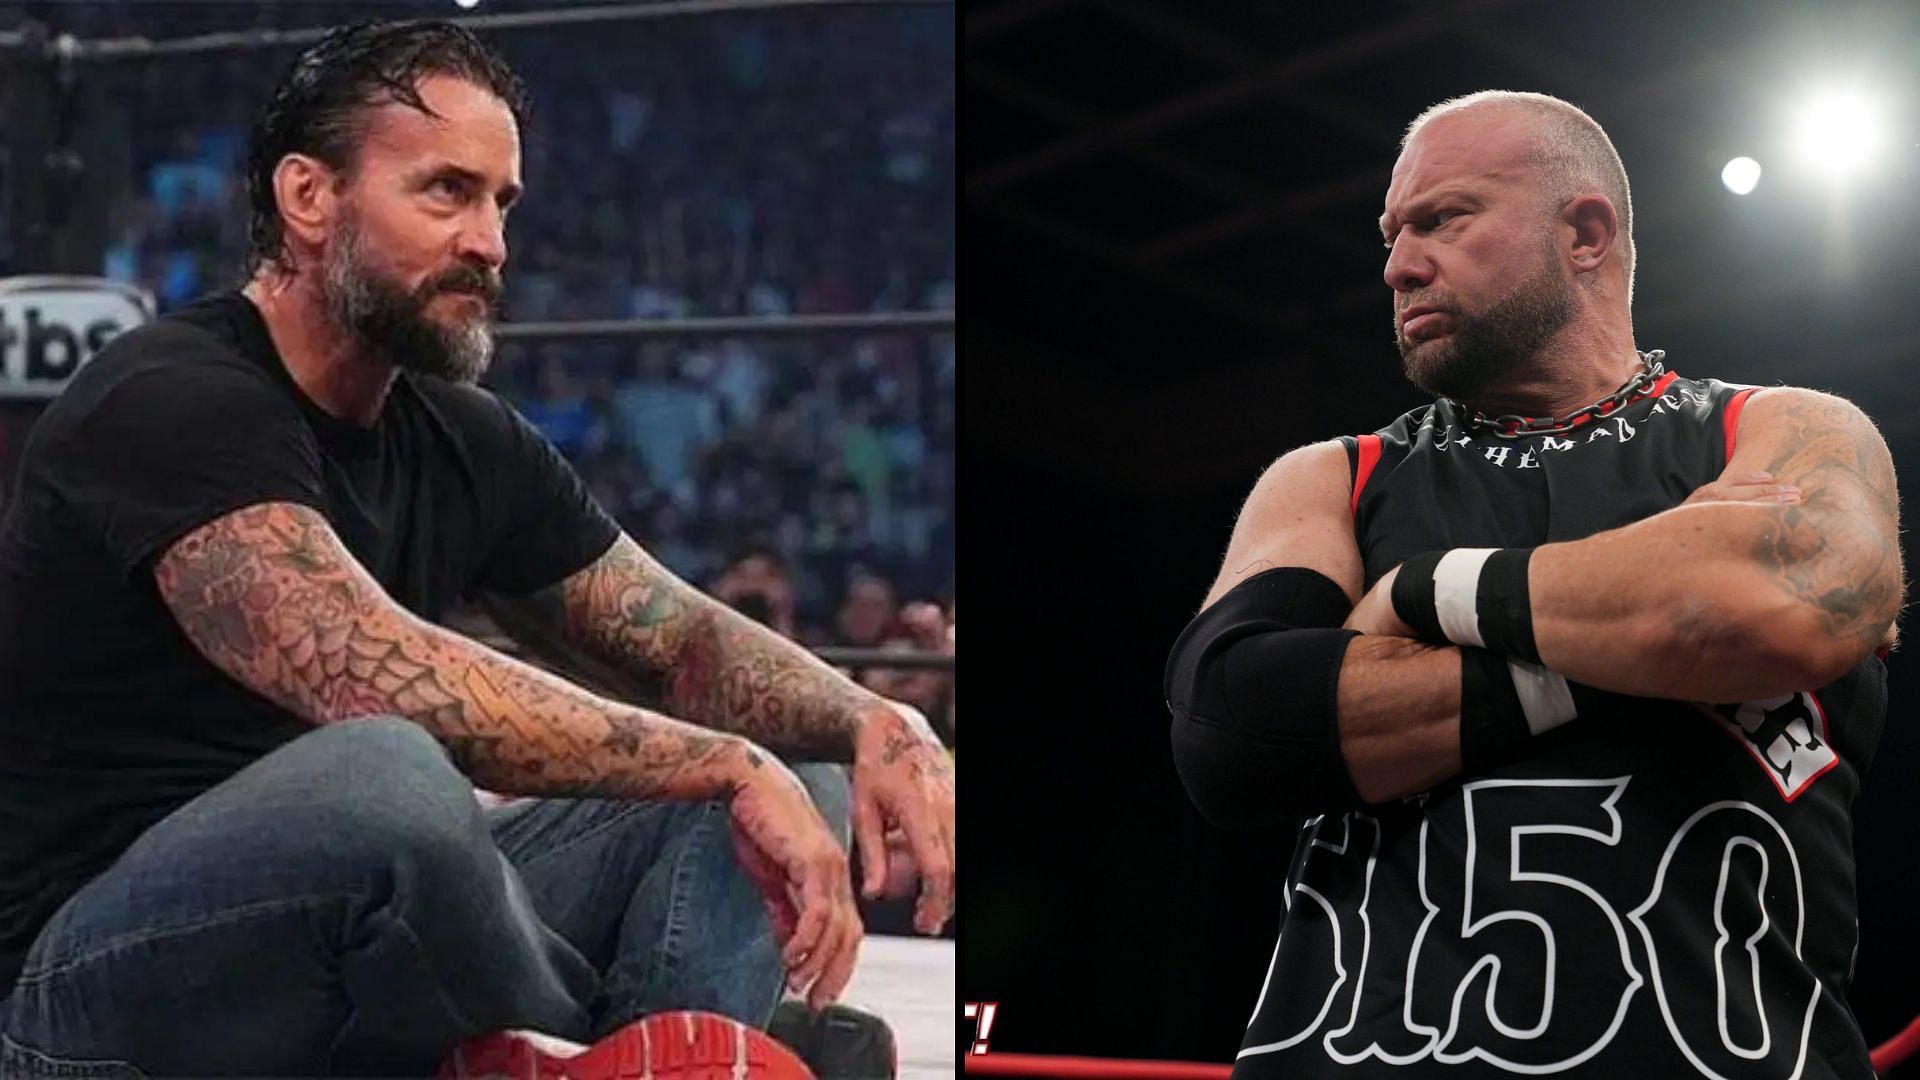 CM Punk and Bully Ray are both former WWE Superstars